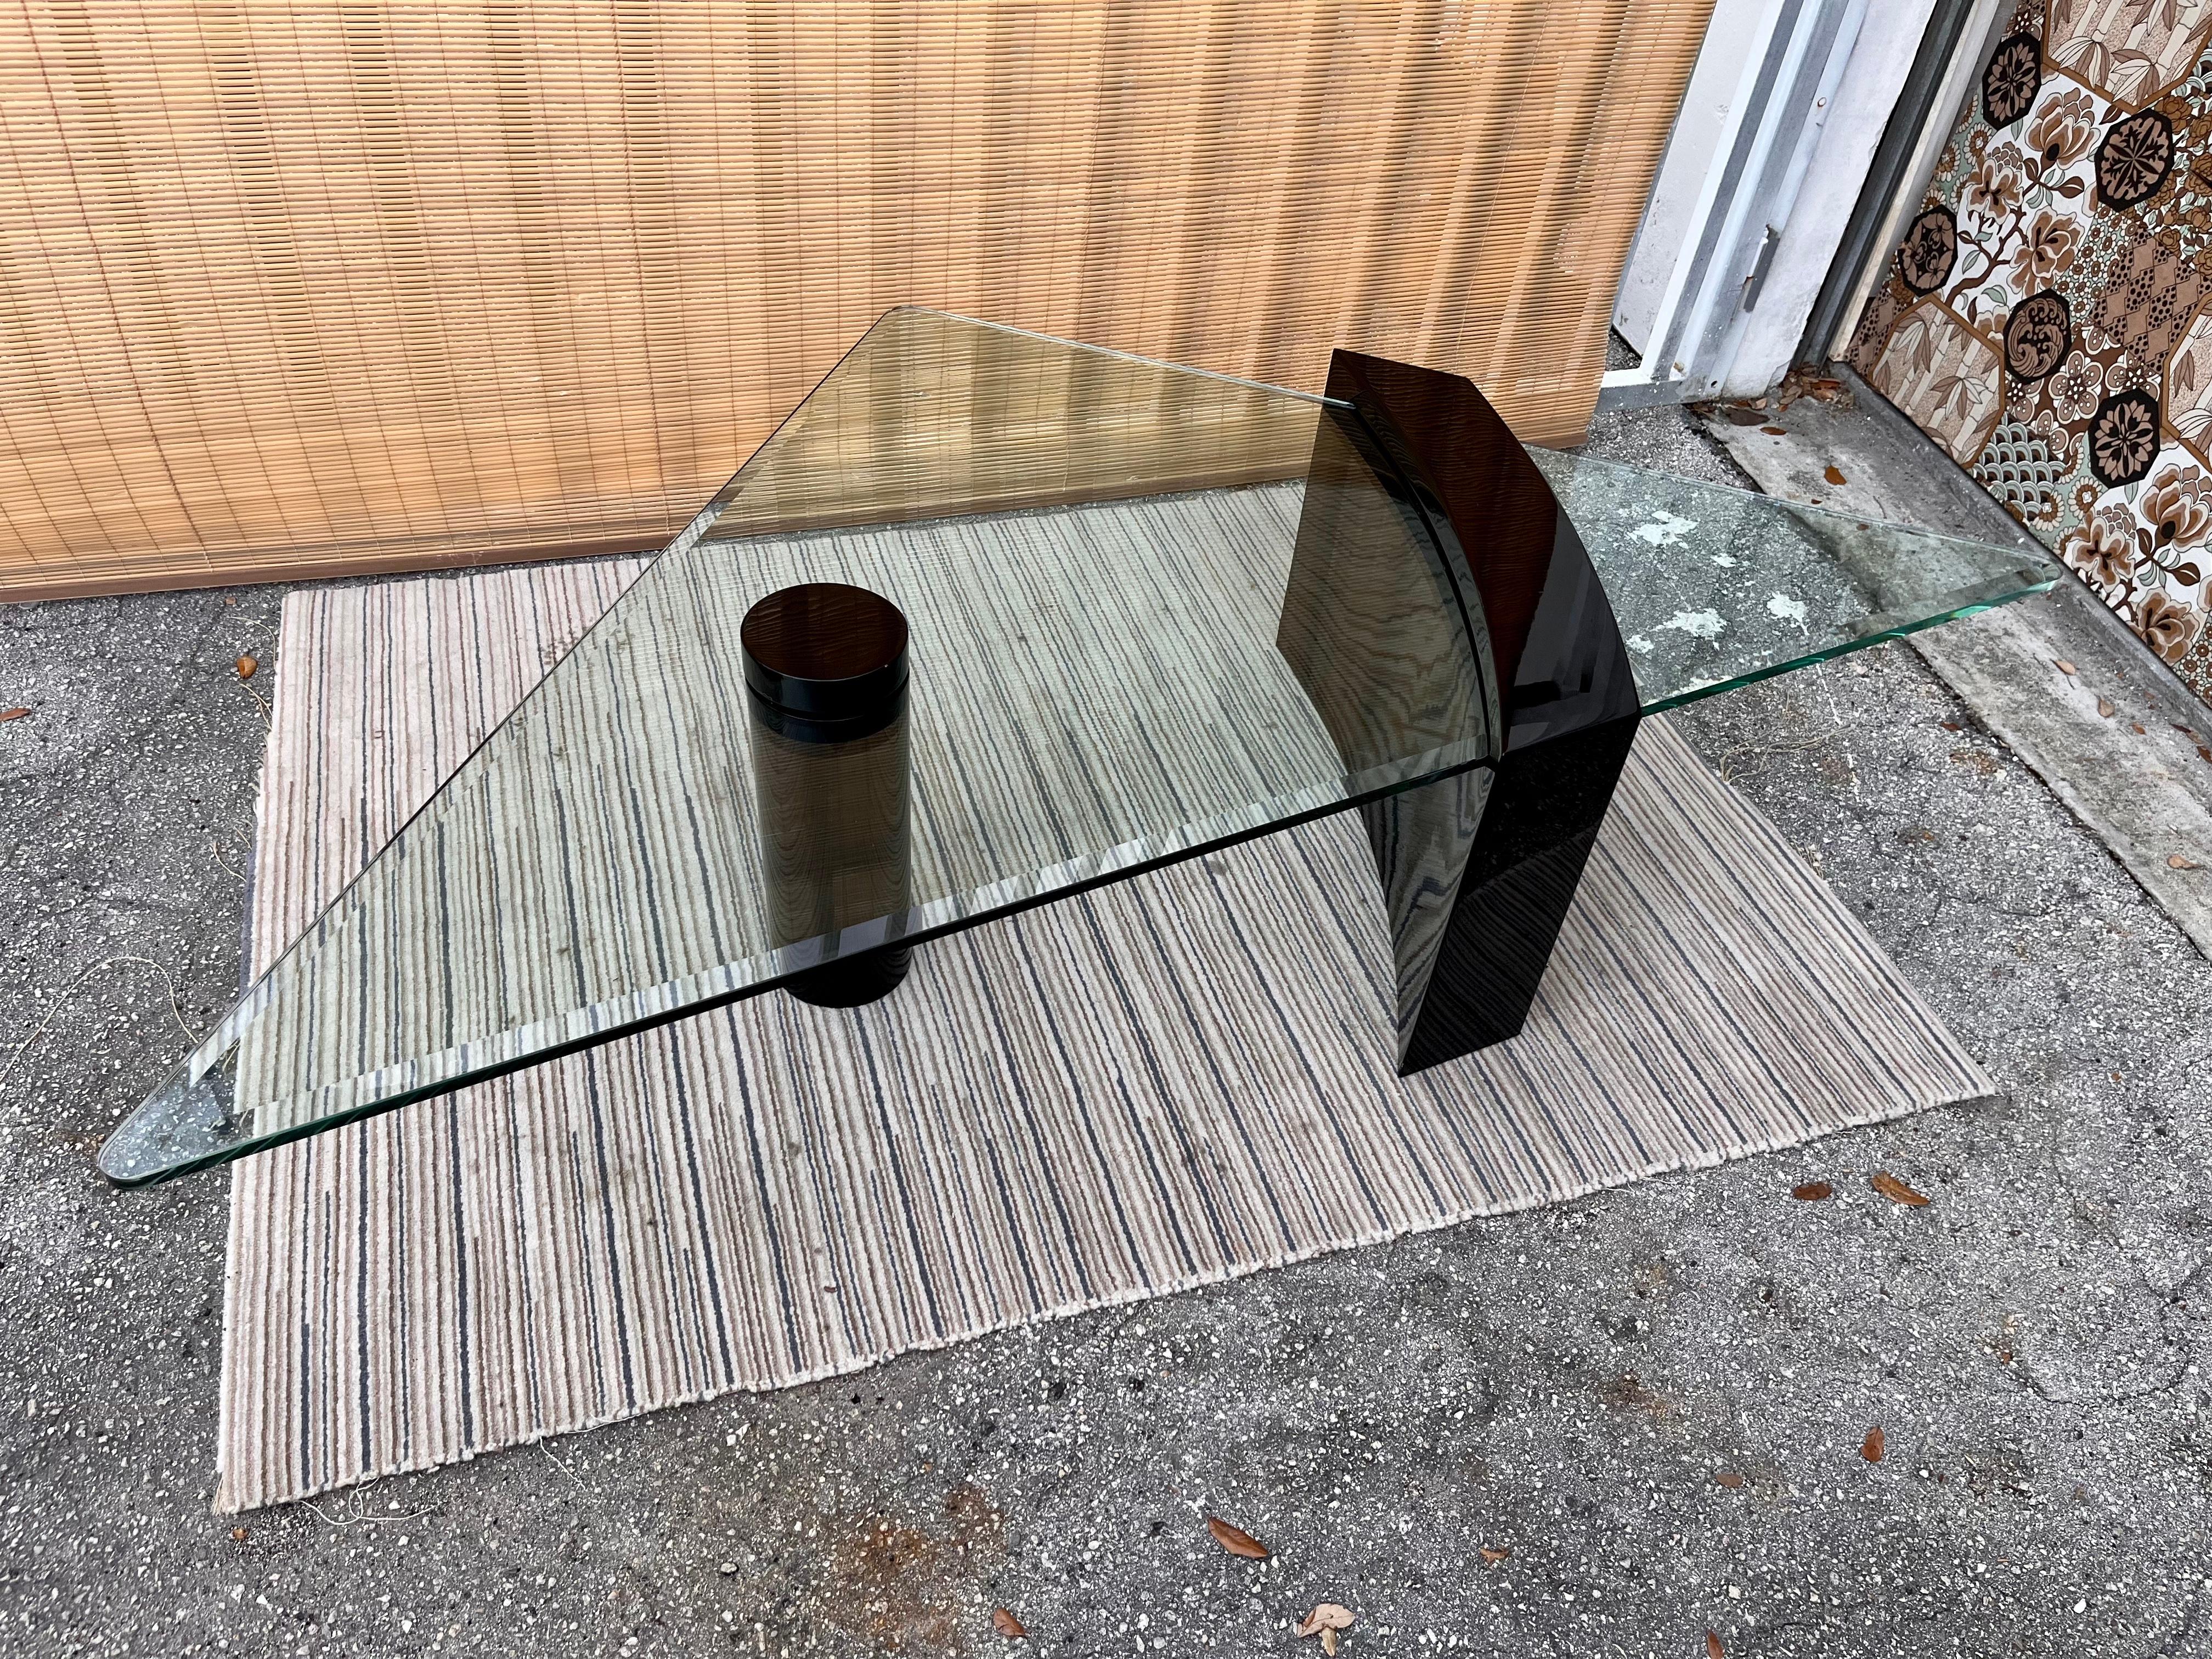 Vintage, large scale post modern sculptural Black Lacquer Coffee Table with a Triangular Glass top in the of Roger Rougier's Style. Circa 1980s. 
Features a glossy lacquered six inches round column and a curved pedestal with a slot that takes the